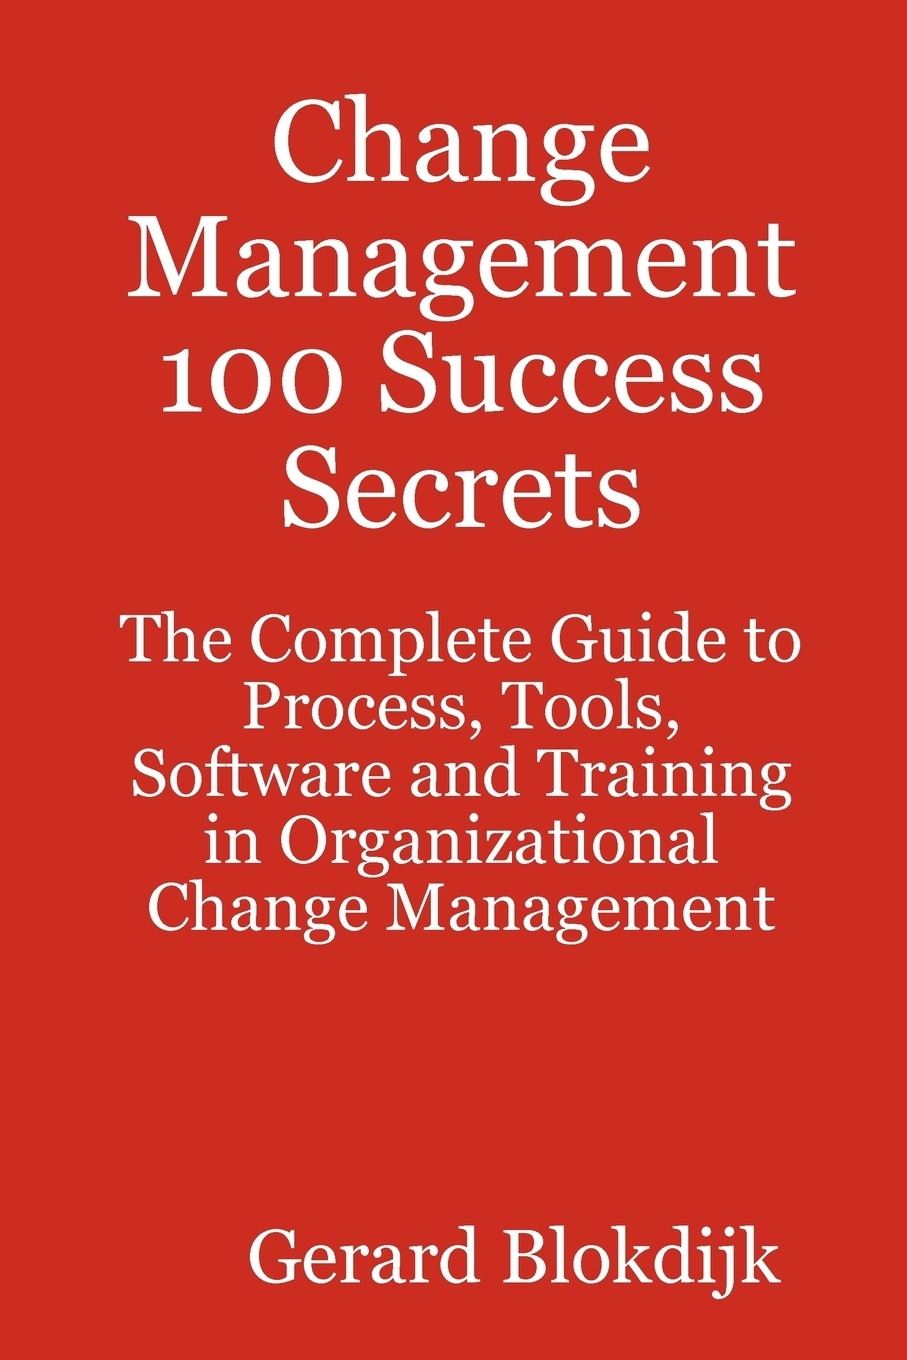 фото Change Management 100 Success Secrets - The Complete Guide to Process, Tools, Software and Training in Organizational Change Management